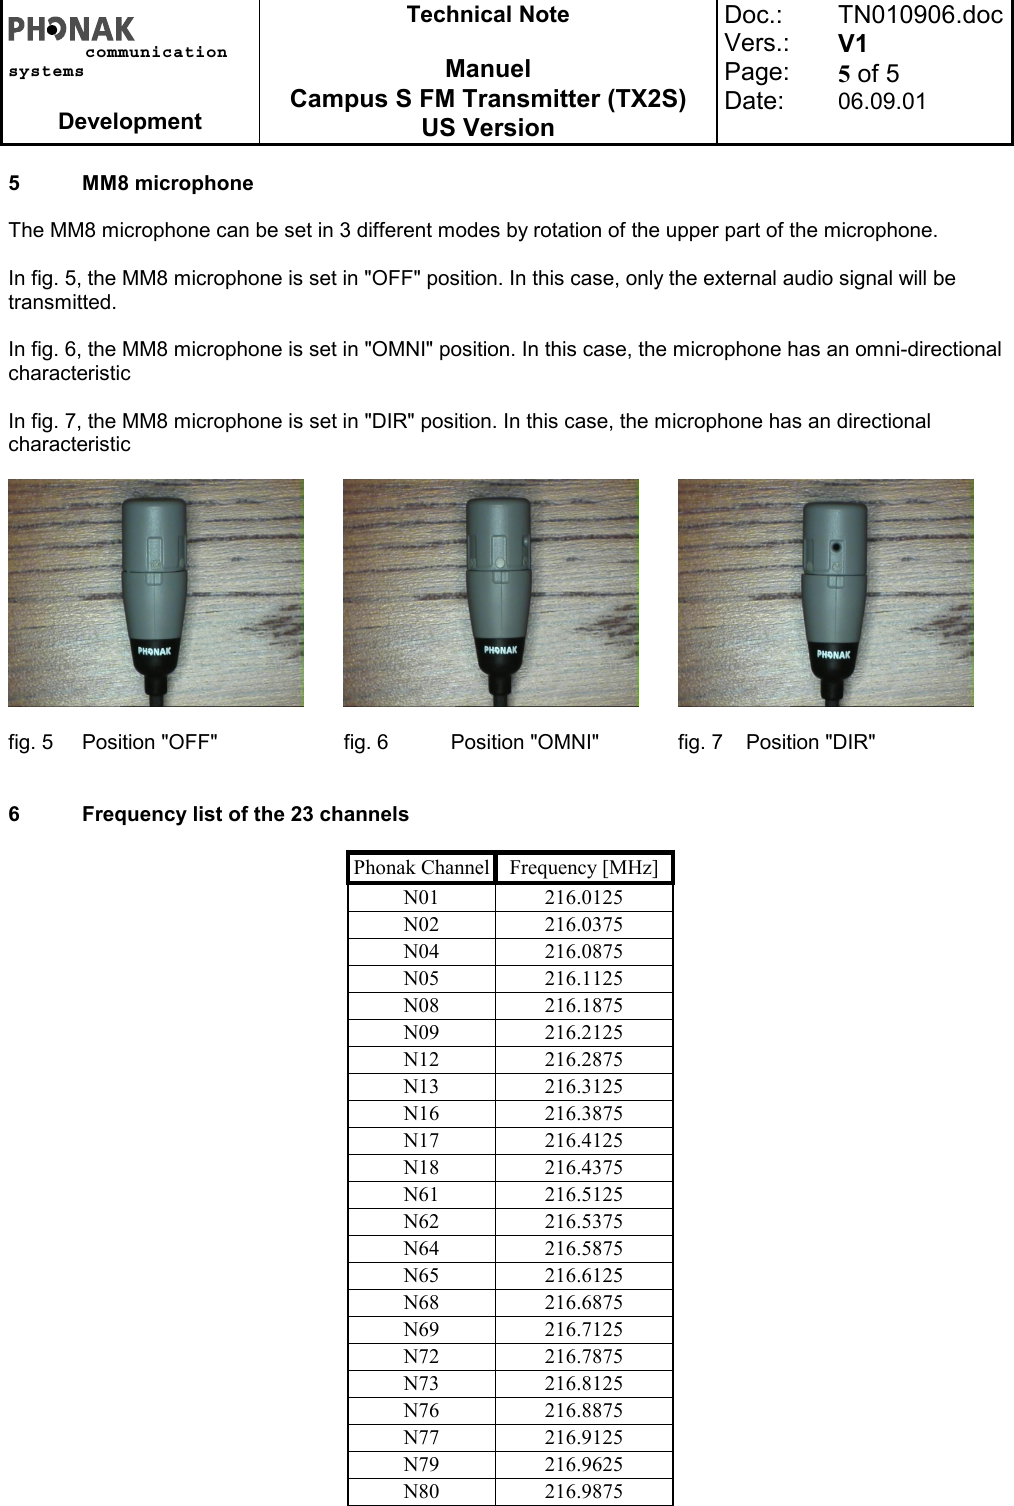 communicationsystemsDevelopmentTechnical NoteManuelCampus S FM Transmitter (TX2S)US VersionDoc.:Vers.:Page:Date:TN010906.docV15 of 506.09.015 MM8 microphoneThe MM8 microphone can be set in 3 different modes by rotation of the upper part of the microphone.In fig. 5, the MM8 microphone is set in &quot;OFF&quot; position. In this case, only the external audio signal will betransmitted.In fig. 6, the MM8 microphone is set in &quot;OMNI&quot; position. In this case, the microphone has an omni-directionalcharacteristicIn fig. 7, the MM8 microphone is set in &quot;DIR&quot; position. In this case, the microphone has an directionalcharacteristic               fig. 5 Position &quot;OFF&quot;        fig. 6 Position &quot;OMNI&quot;  fig. 7 Position &quot;DIR&quot;6 Frequency list of the 23 channelsPhonak Channel Frequency [MHz]N01 216.0125N02 216.0375N04 216.0875N05 216.1125N08 216.1875N09 216.2125N12 216.2875N13 216.3125N16 216.3875N17 216.4125N18 216.4375N61 216.5125N62 216.5375N64 216.5875N65 216.6125N68 216.6875N69 216.7125N72 216.7875N73 216.8125N76 216.8875N77 216.9125N79 216.9625N80 216.9875